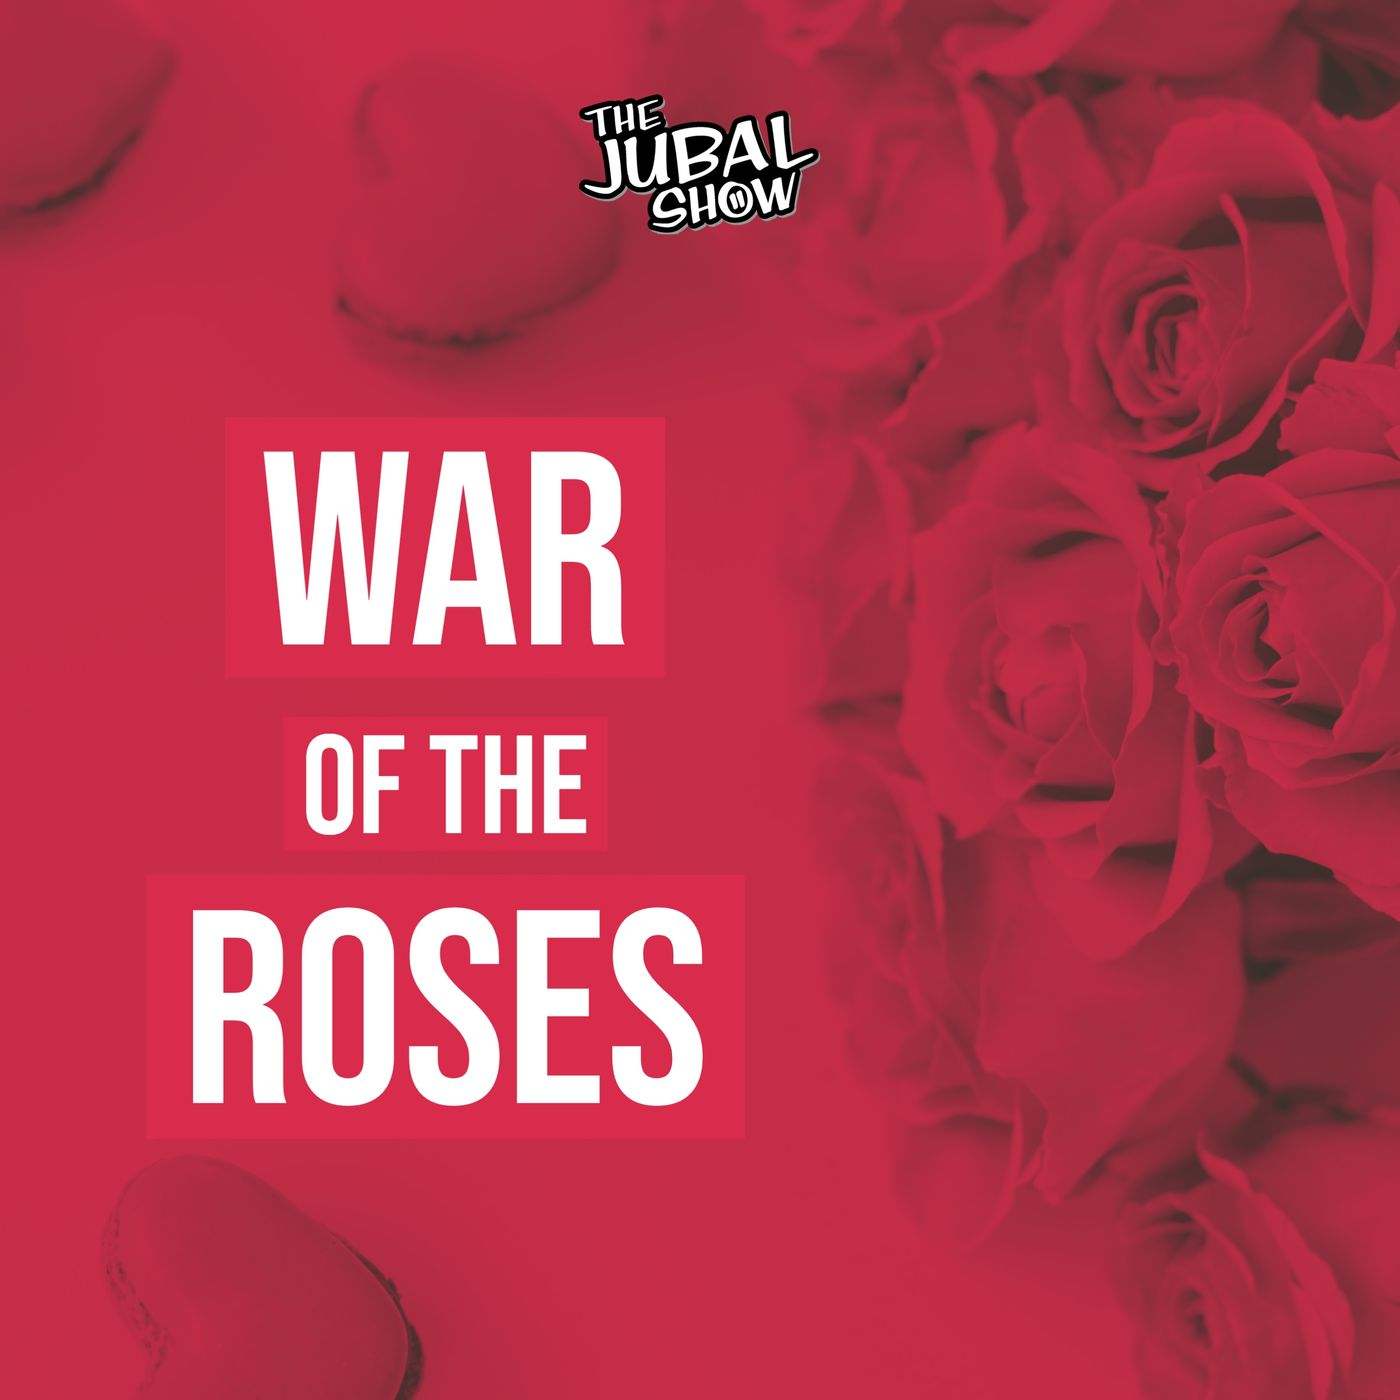 You'll never guess what Ava will do if we catch a cheater in this War of the Roses!